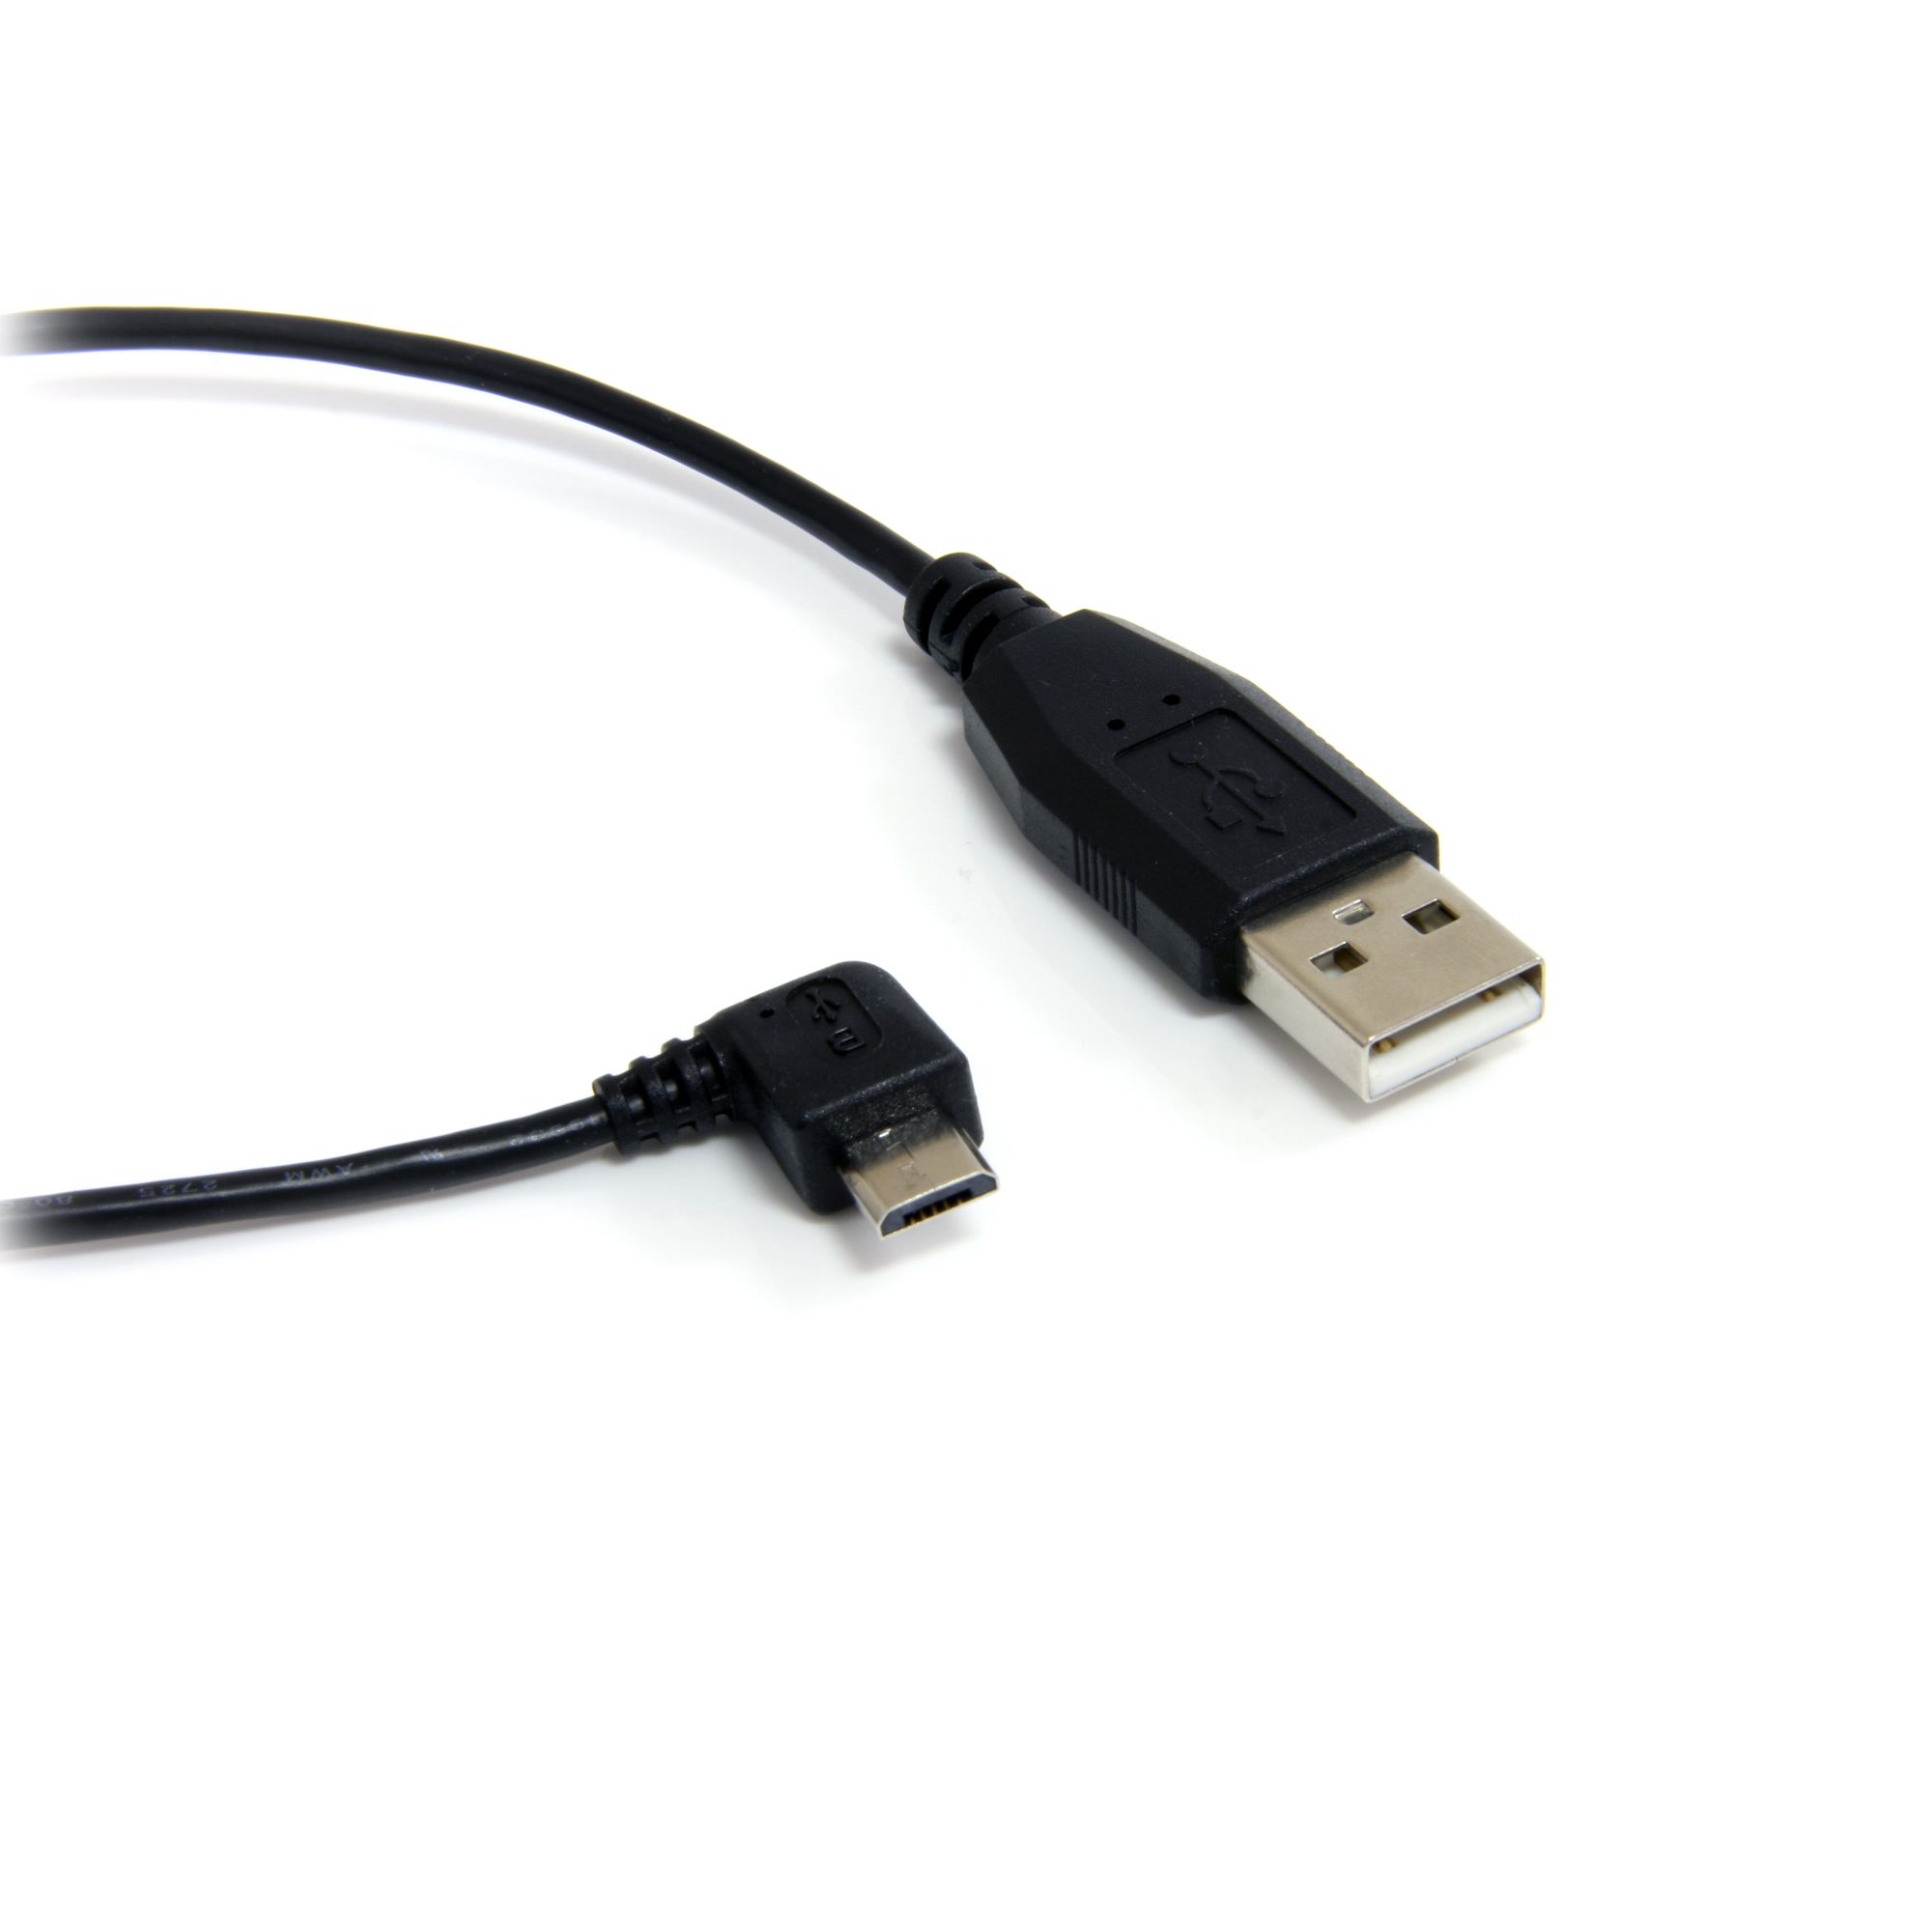 USB A male to Mini B 5 pin 90 degree right angle male data adapter cable Cord MM 